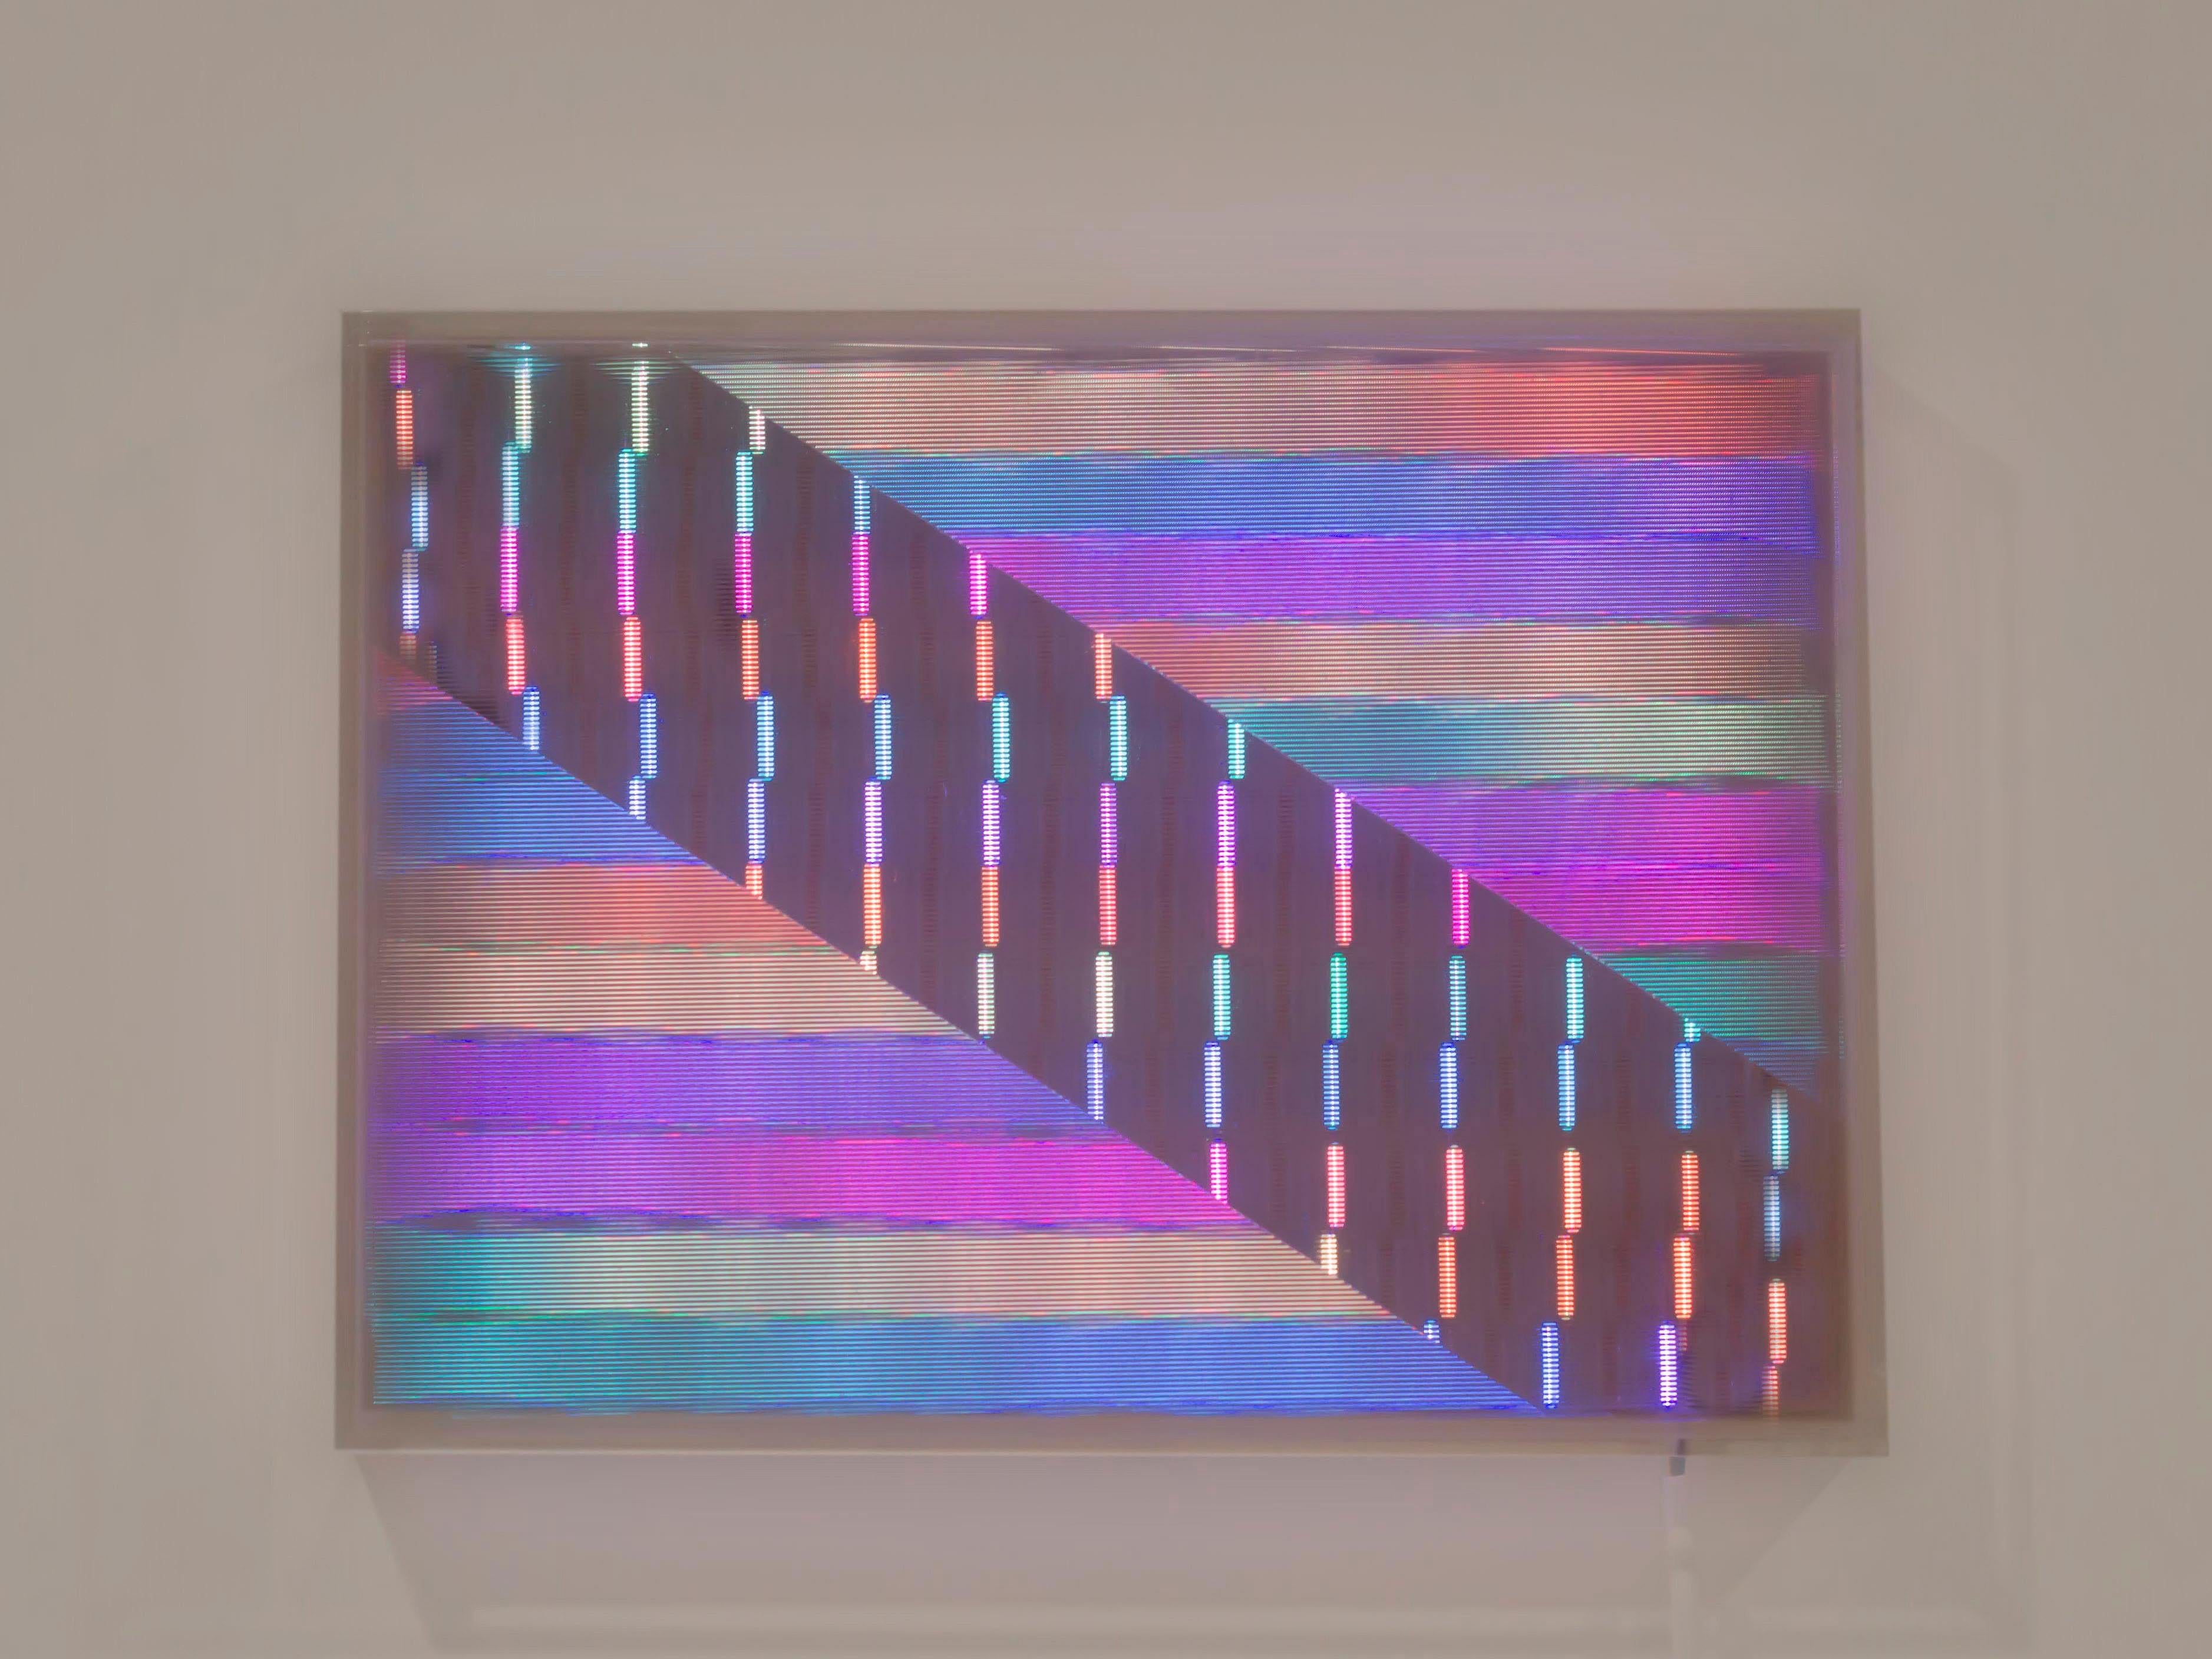 Ebb and Flow - Diagonal I, LED Enabled Wall Art, 2021 - Mixed Media Art by Jasmine Pilcher